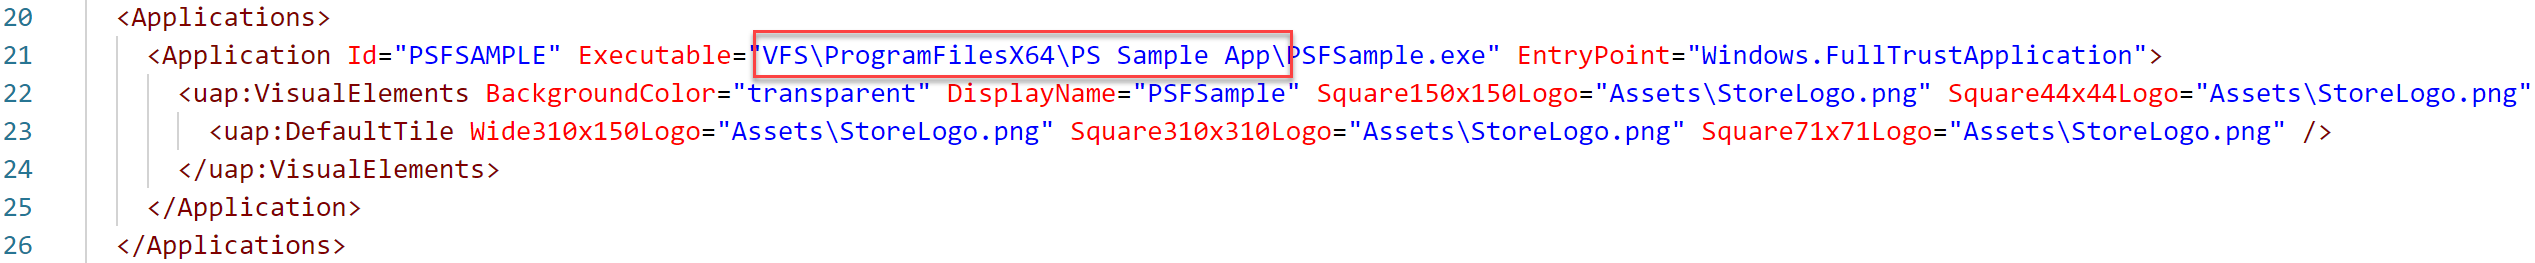 Image circling the location of the working directory within the AppxManifest file.